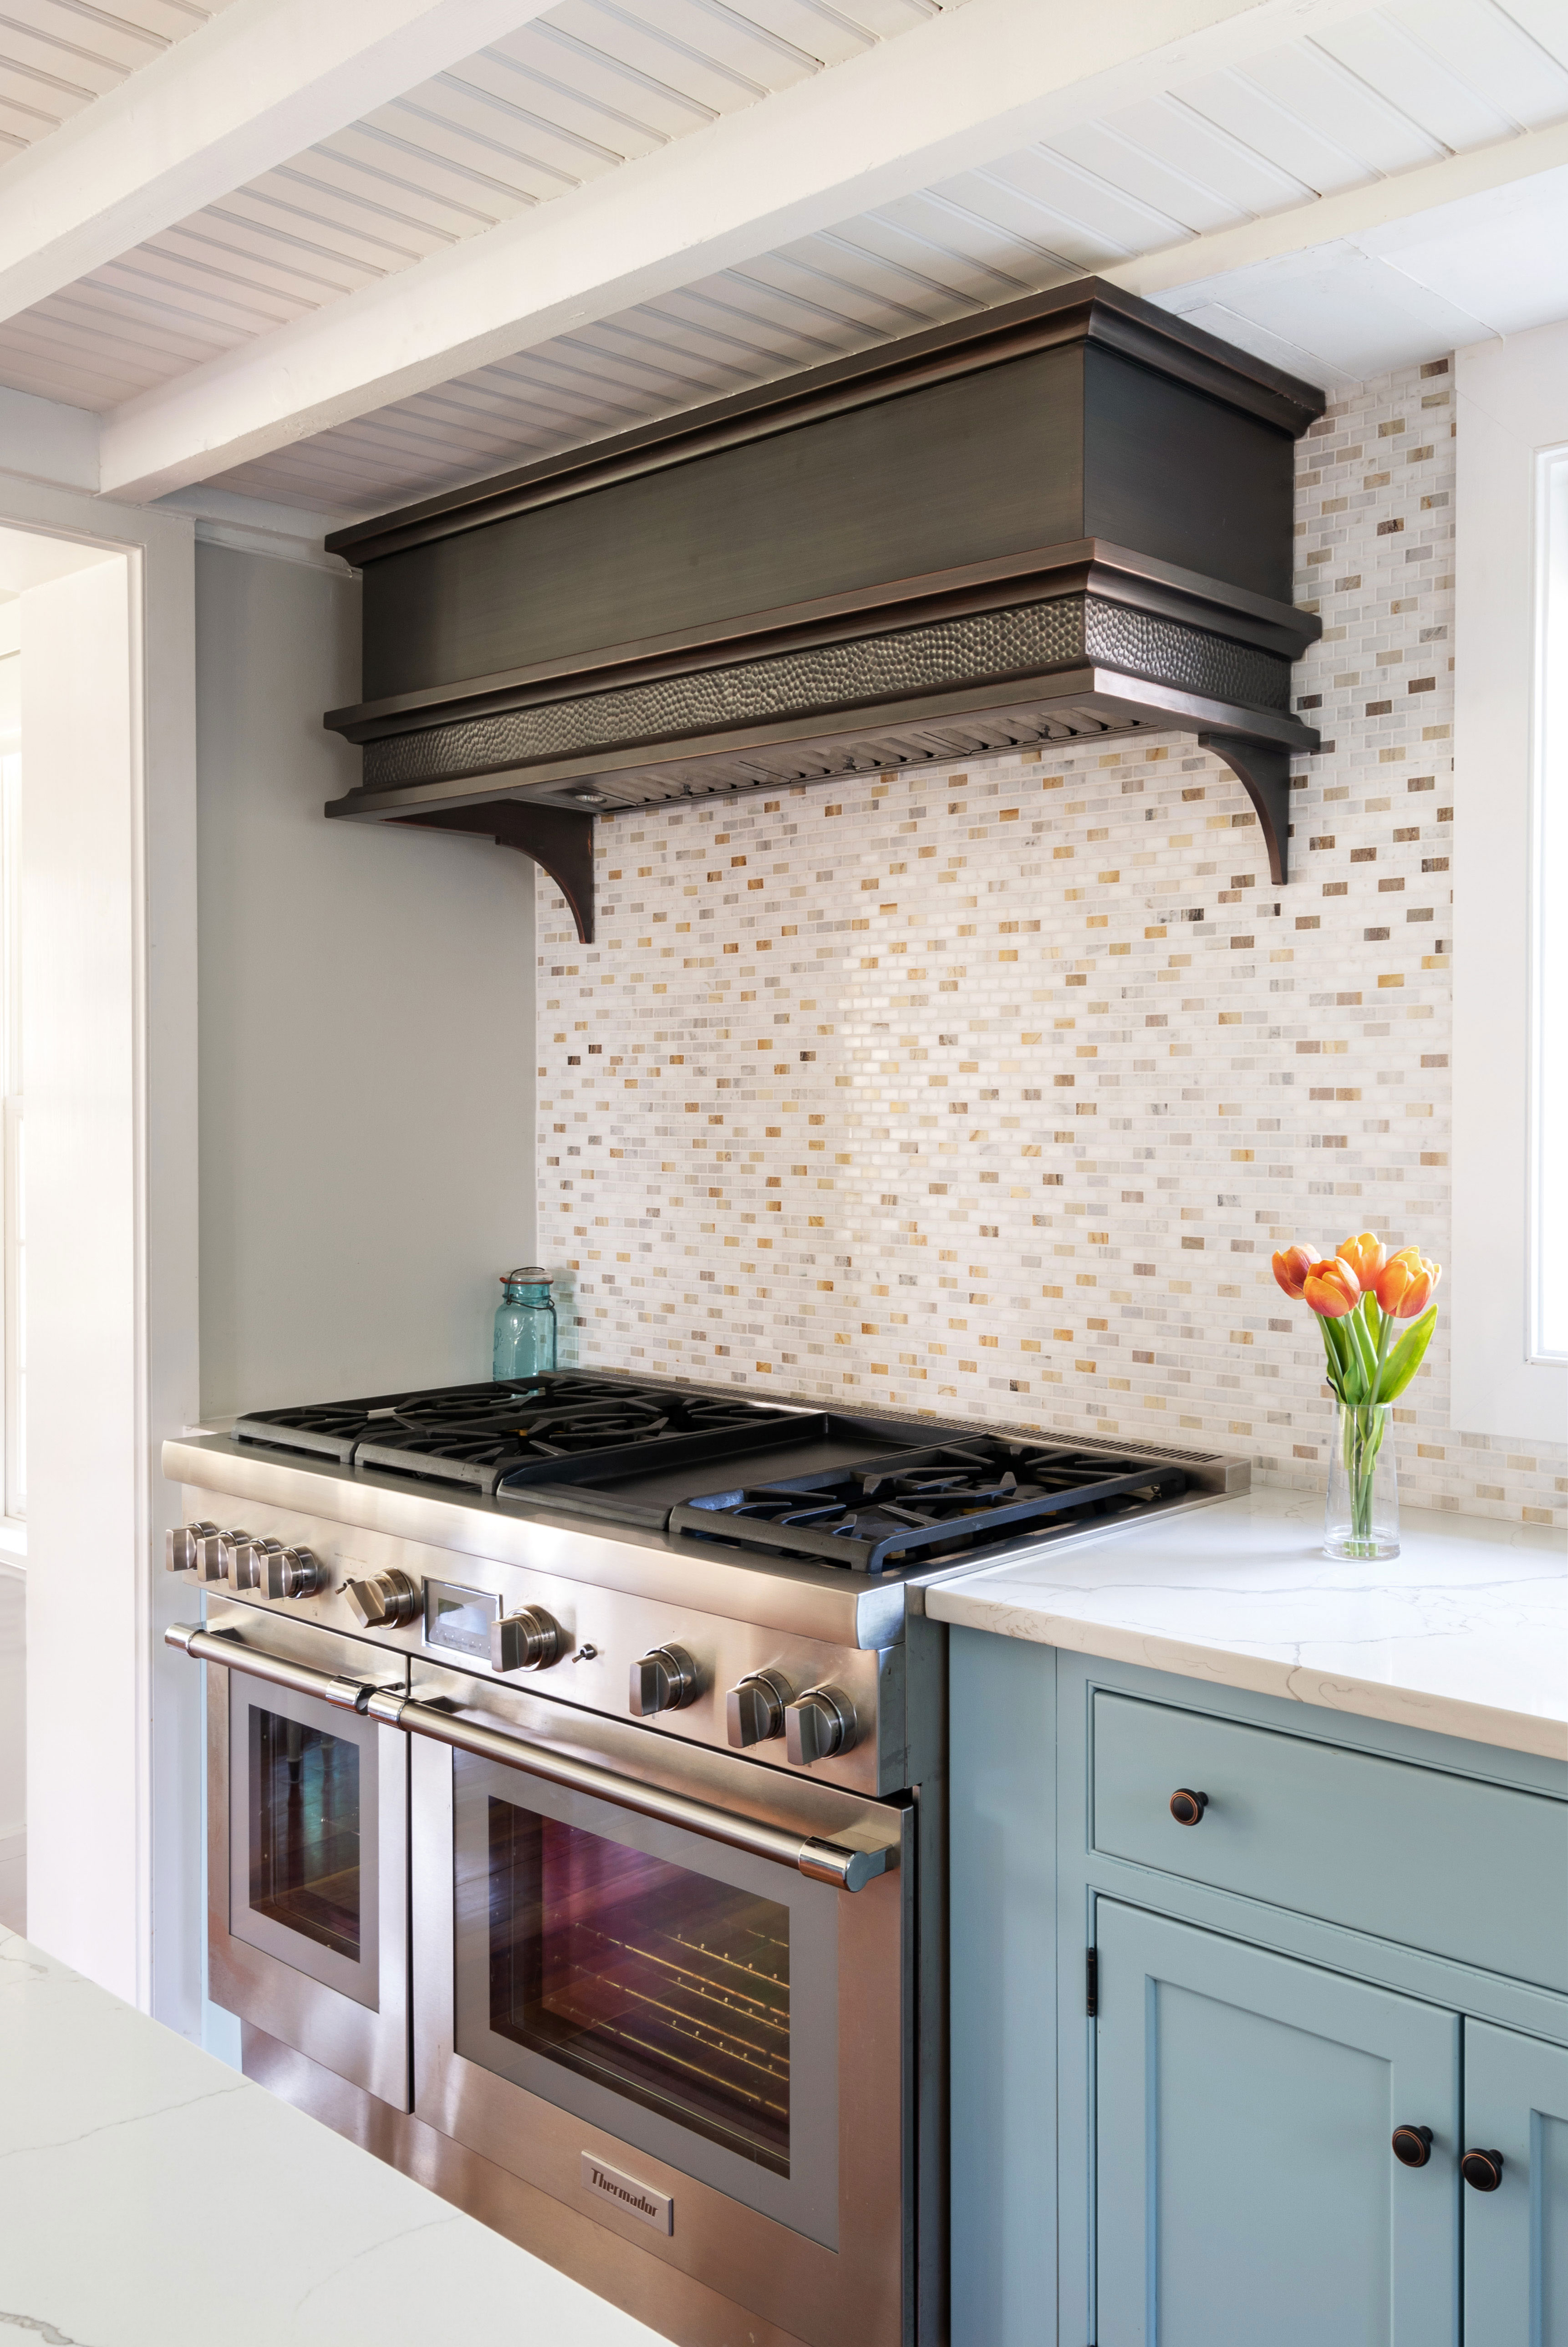 Copper range hood with dappled pattern and brushed finish in a kitchen with wood beam ceilings.